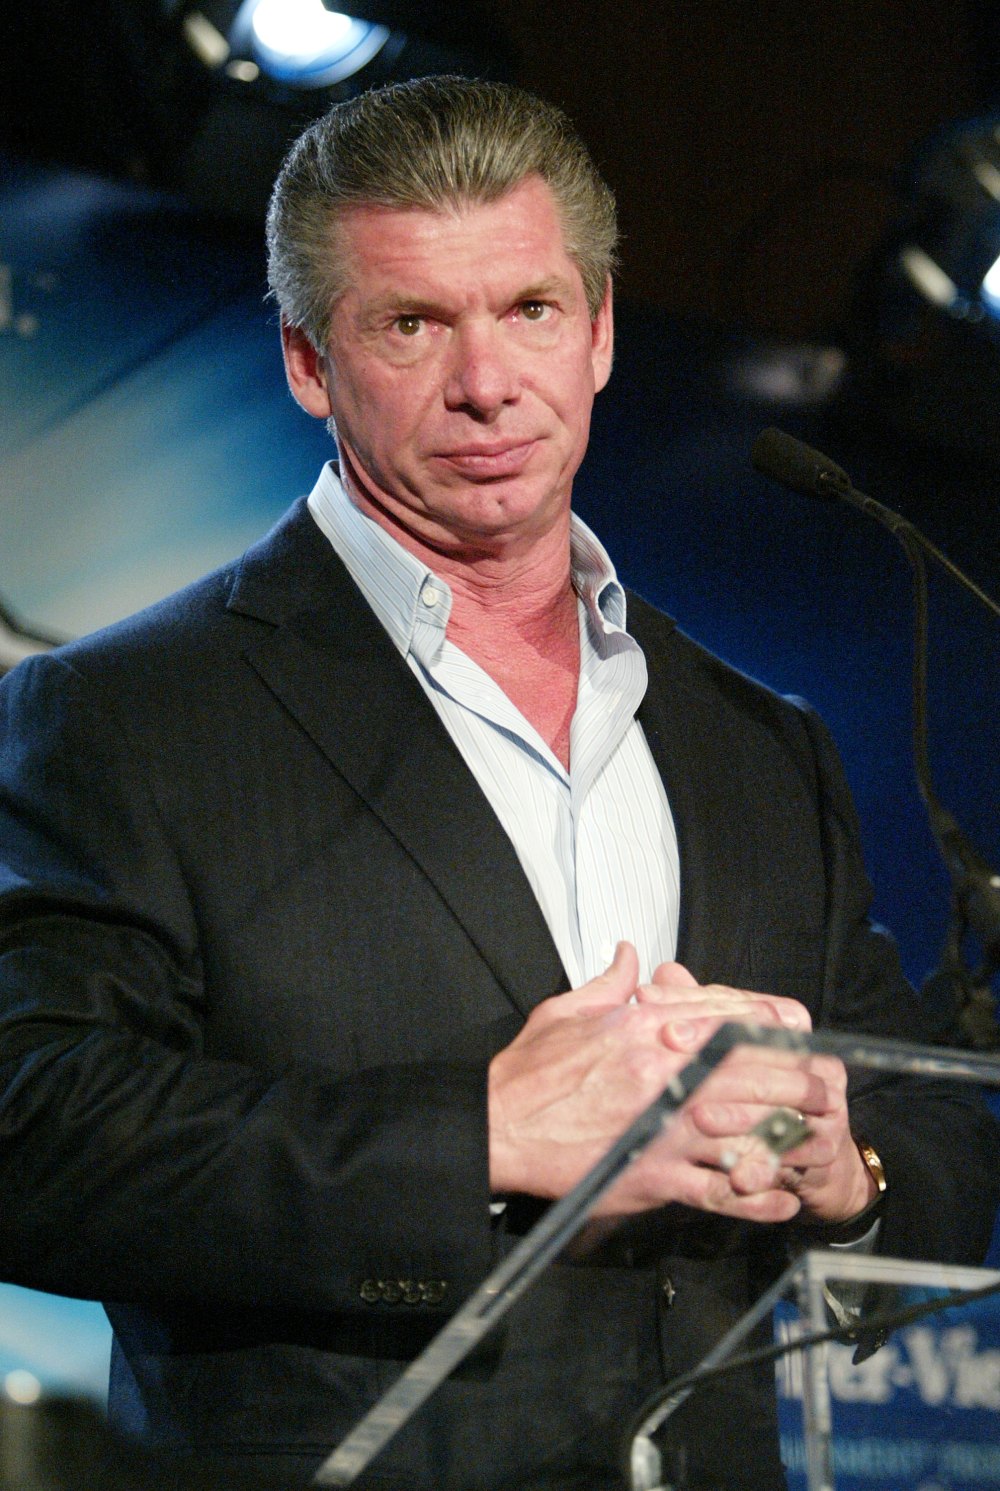 WrestleMania press conference in New York, Vince McMahon